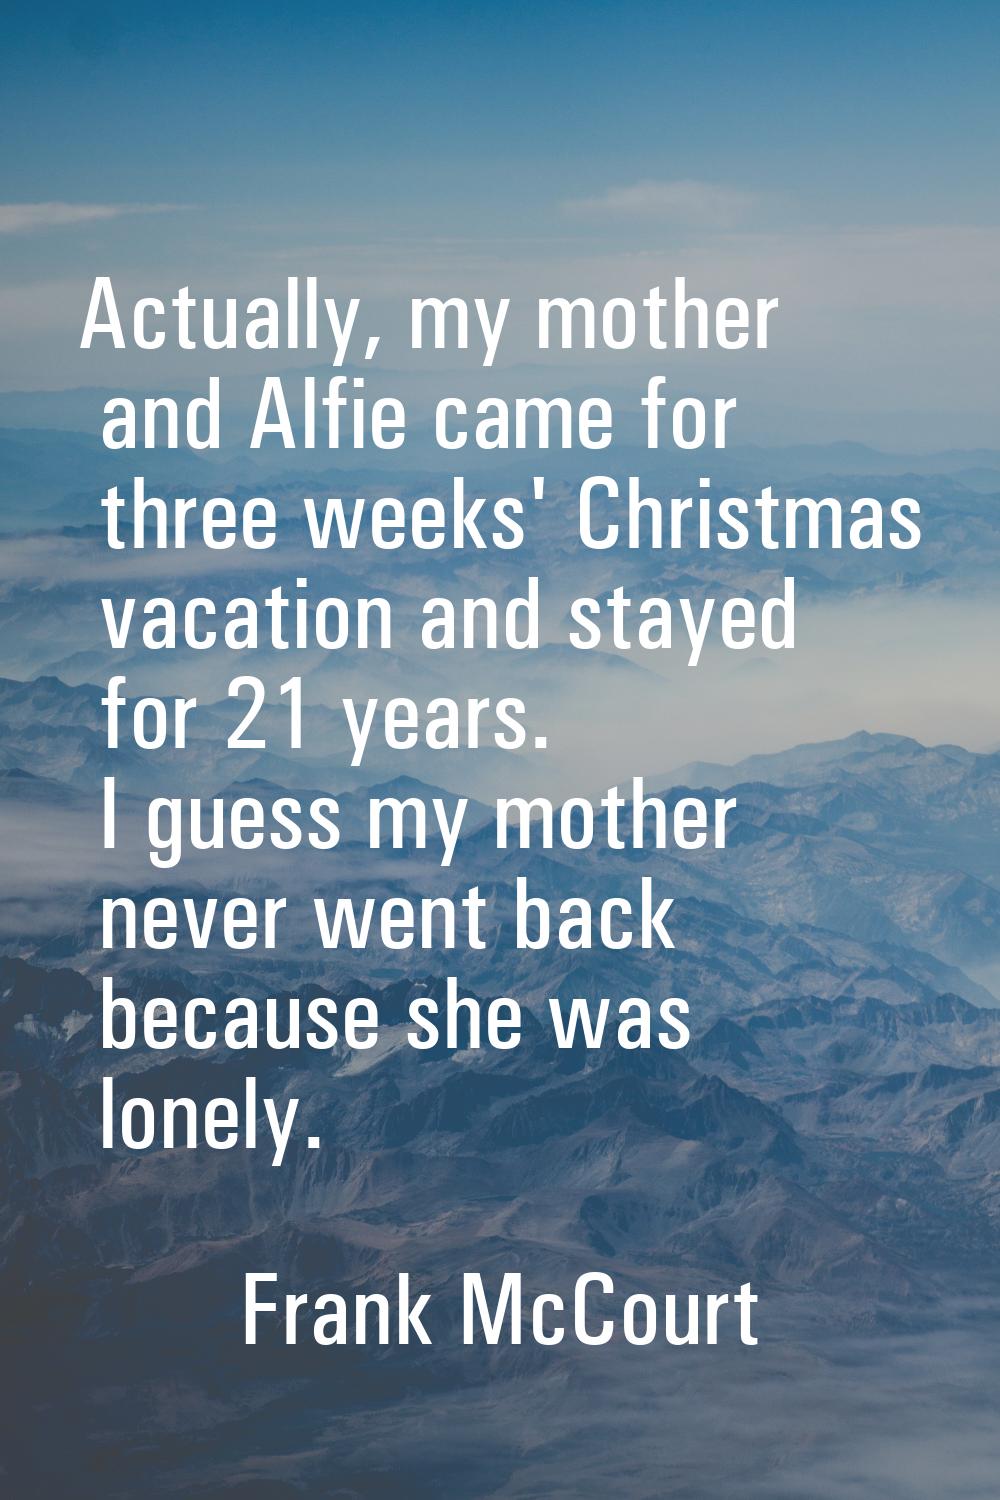 Actually, my mother and Alfie came for three weeks' Christmas vacation and stayed for 21 years. I g